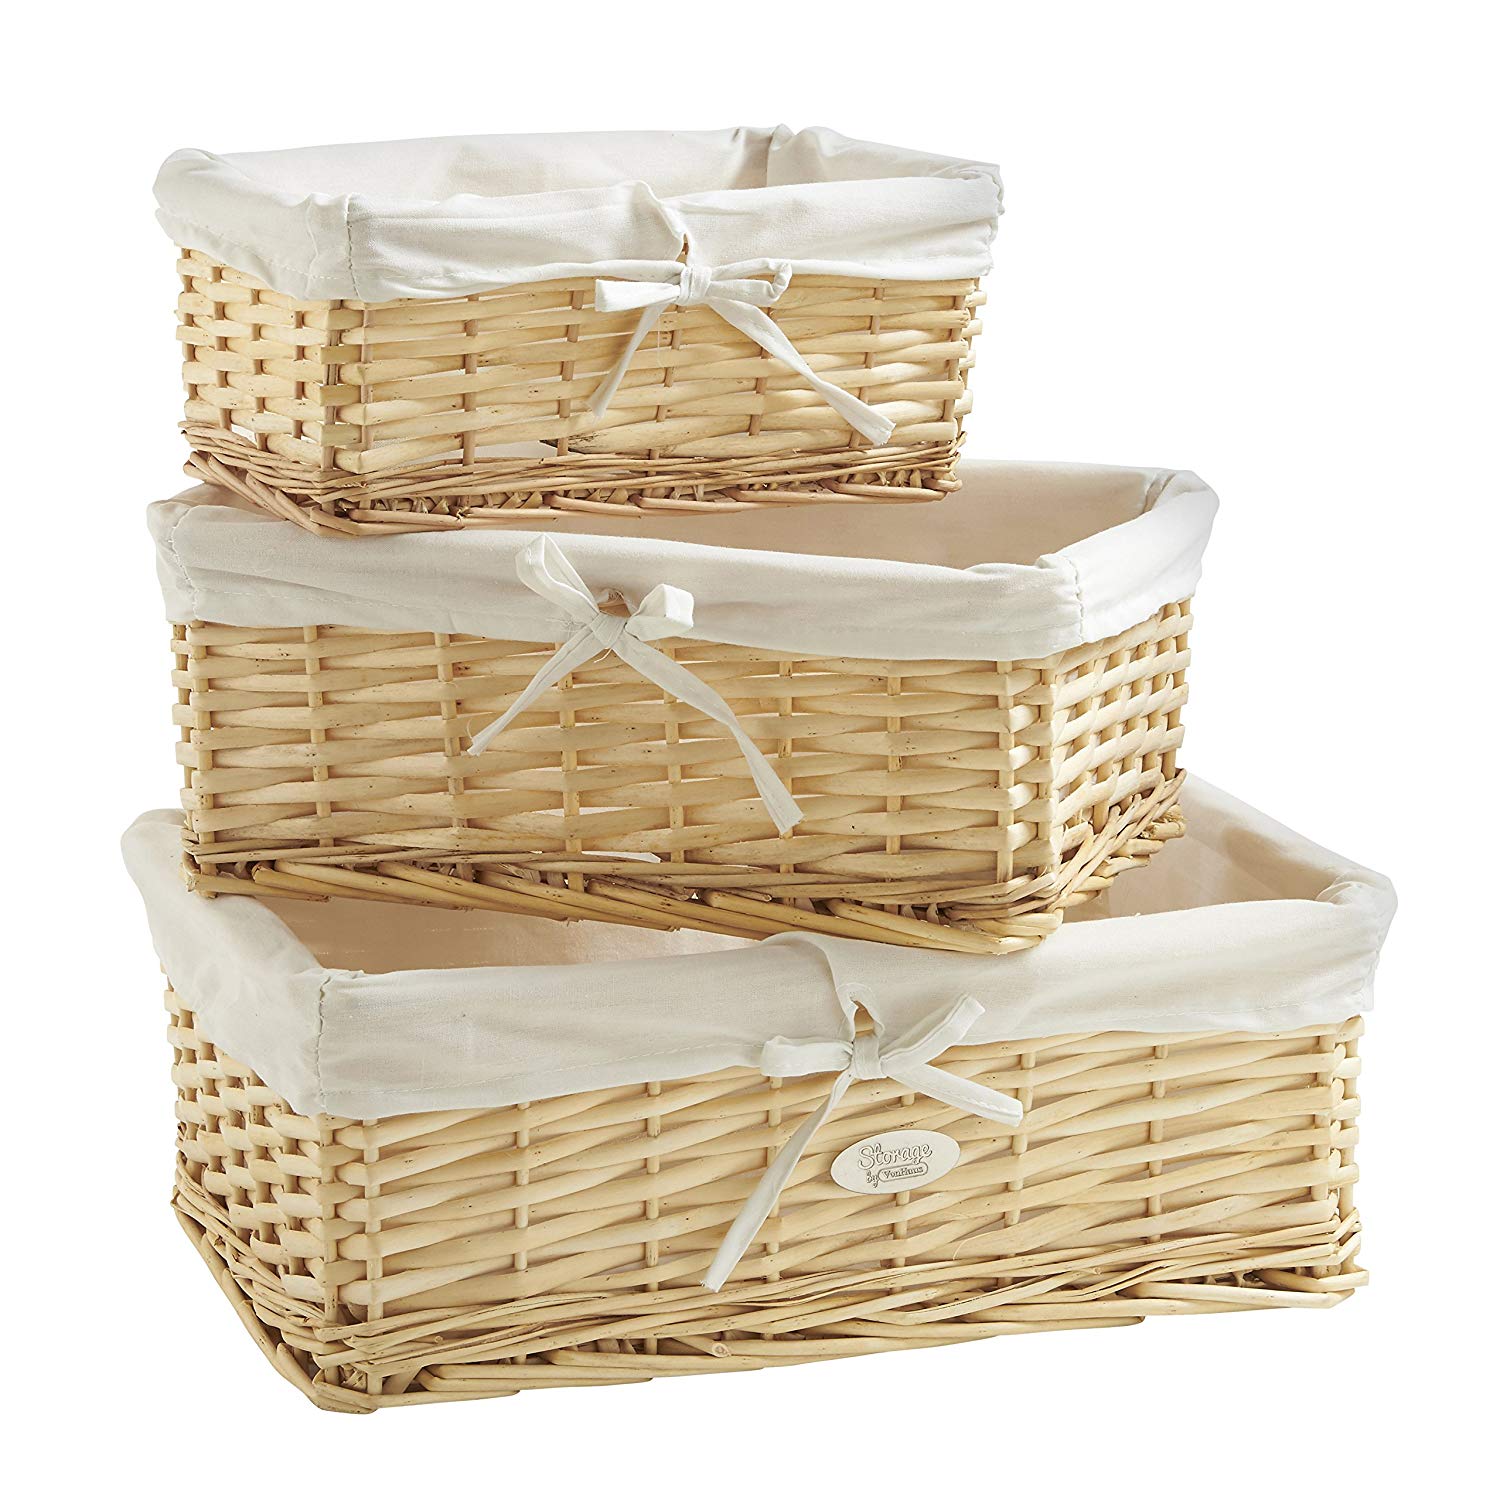  Natural Wicker Baskets with Removable Washable White Liners 